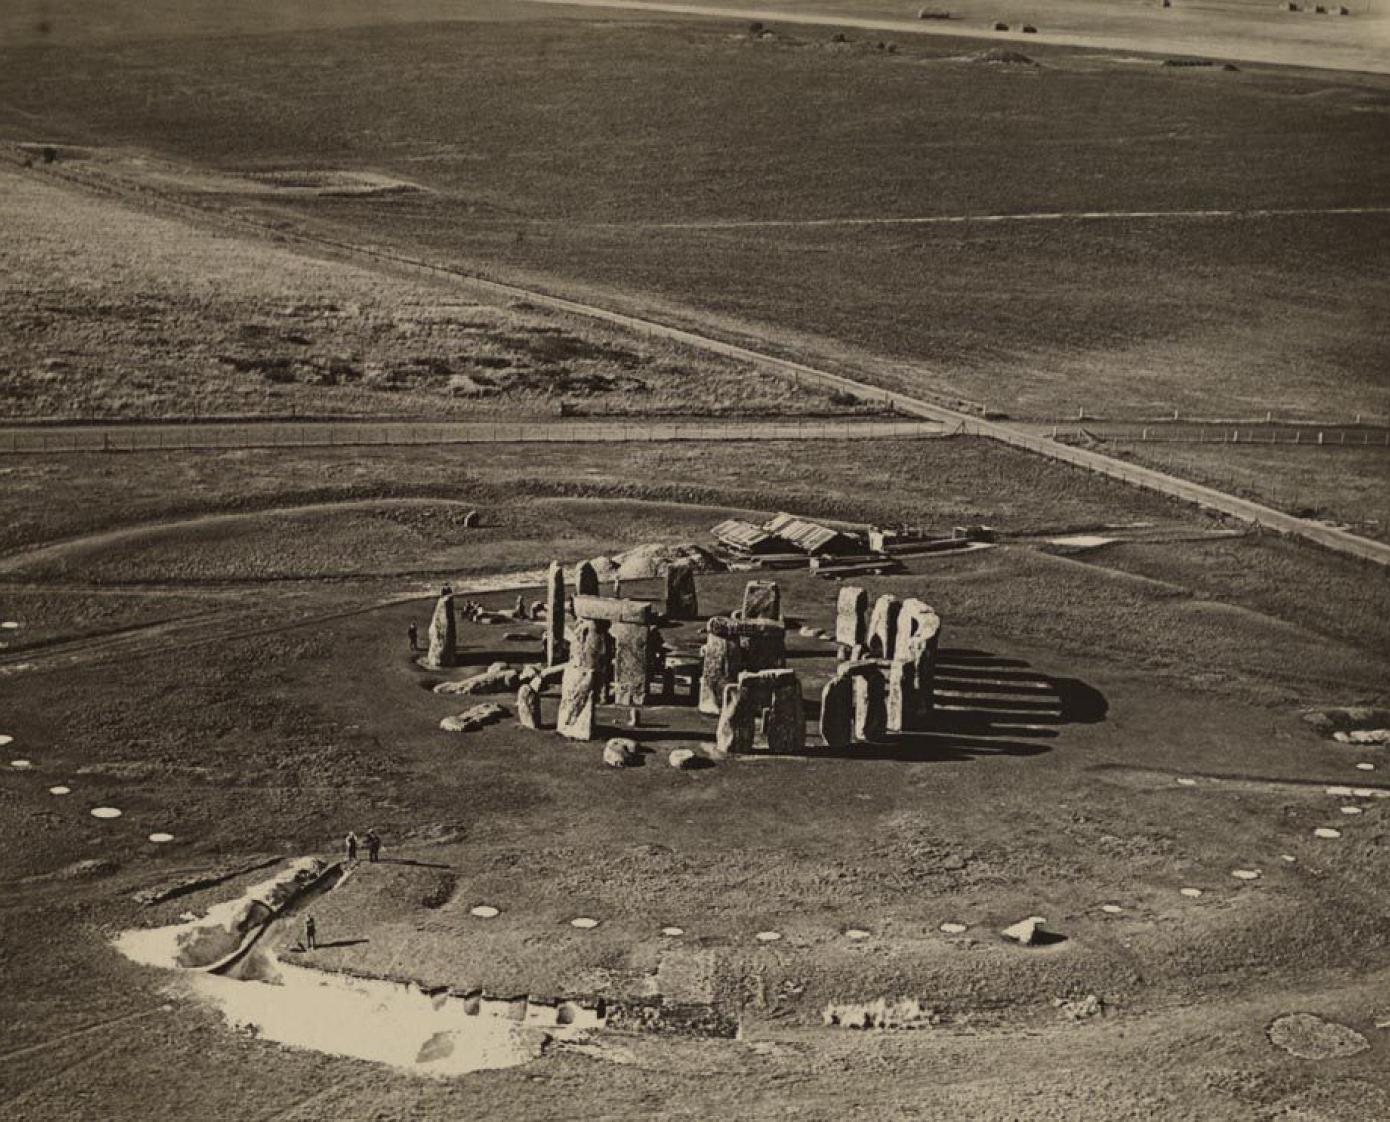 An old image of Stonehenge taken from above 